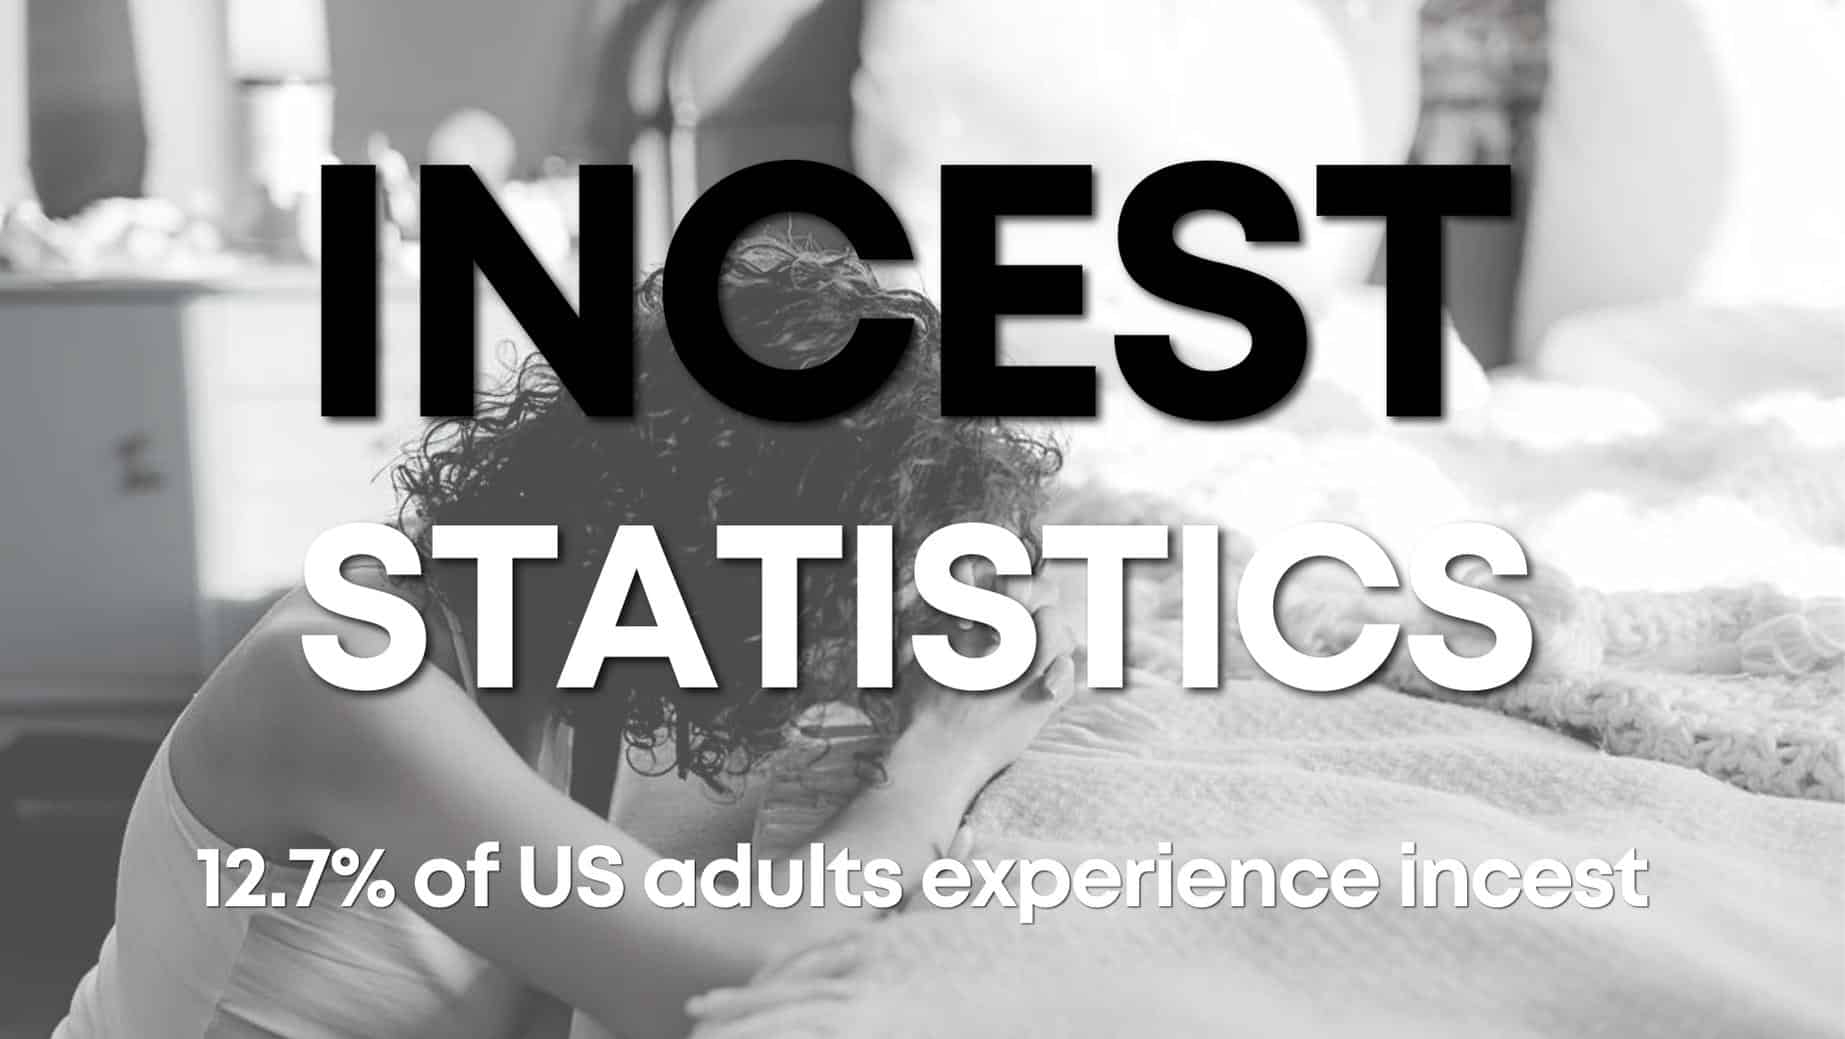 How Common Is Incest? Meta-study on Prevalence, Variety, Effects, and Demographics